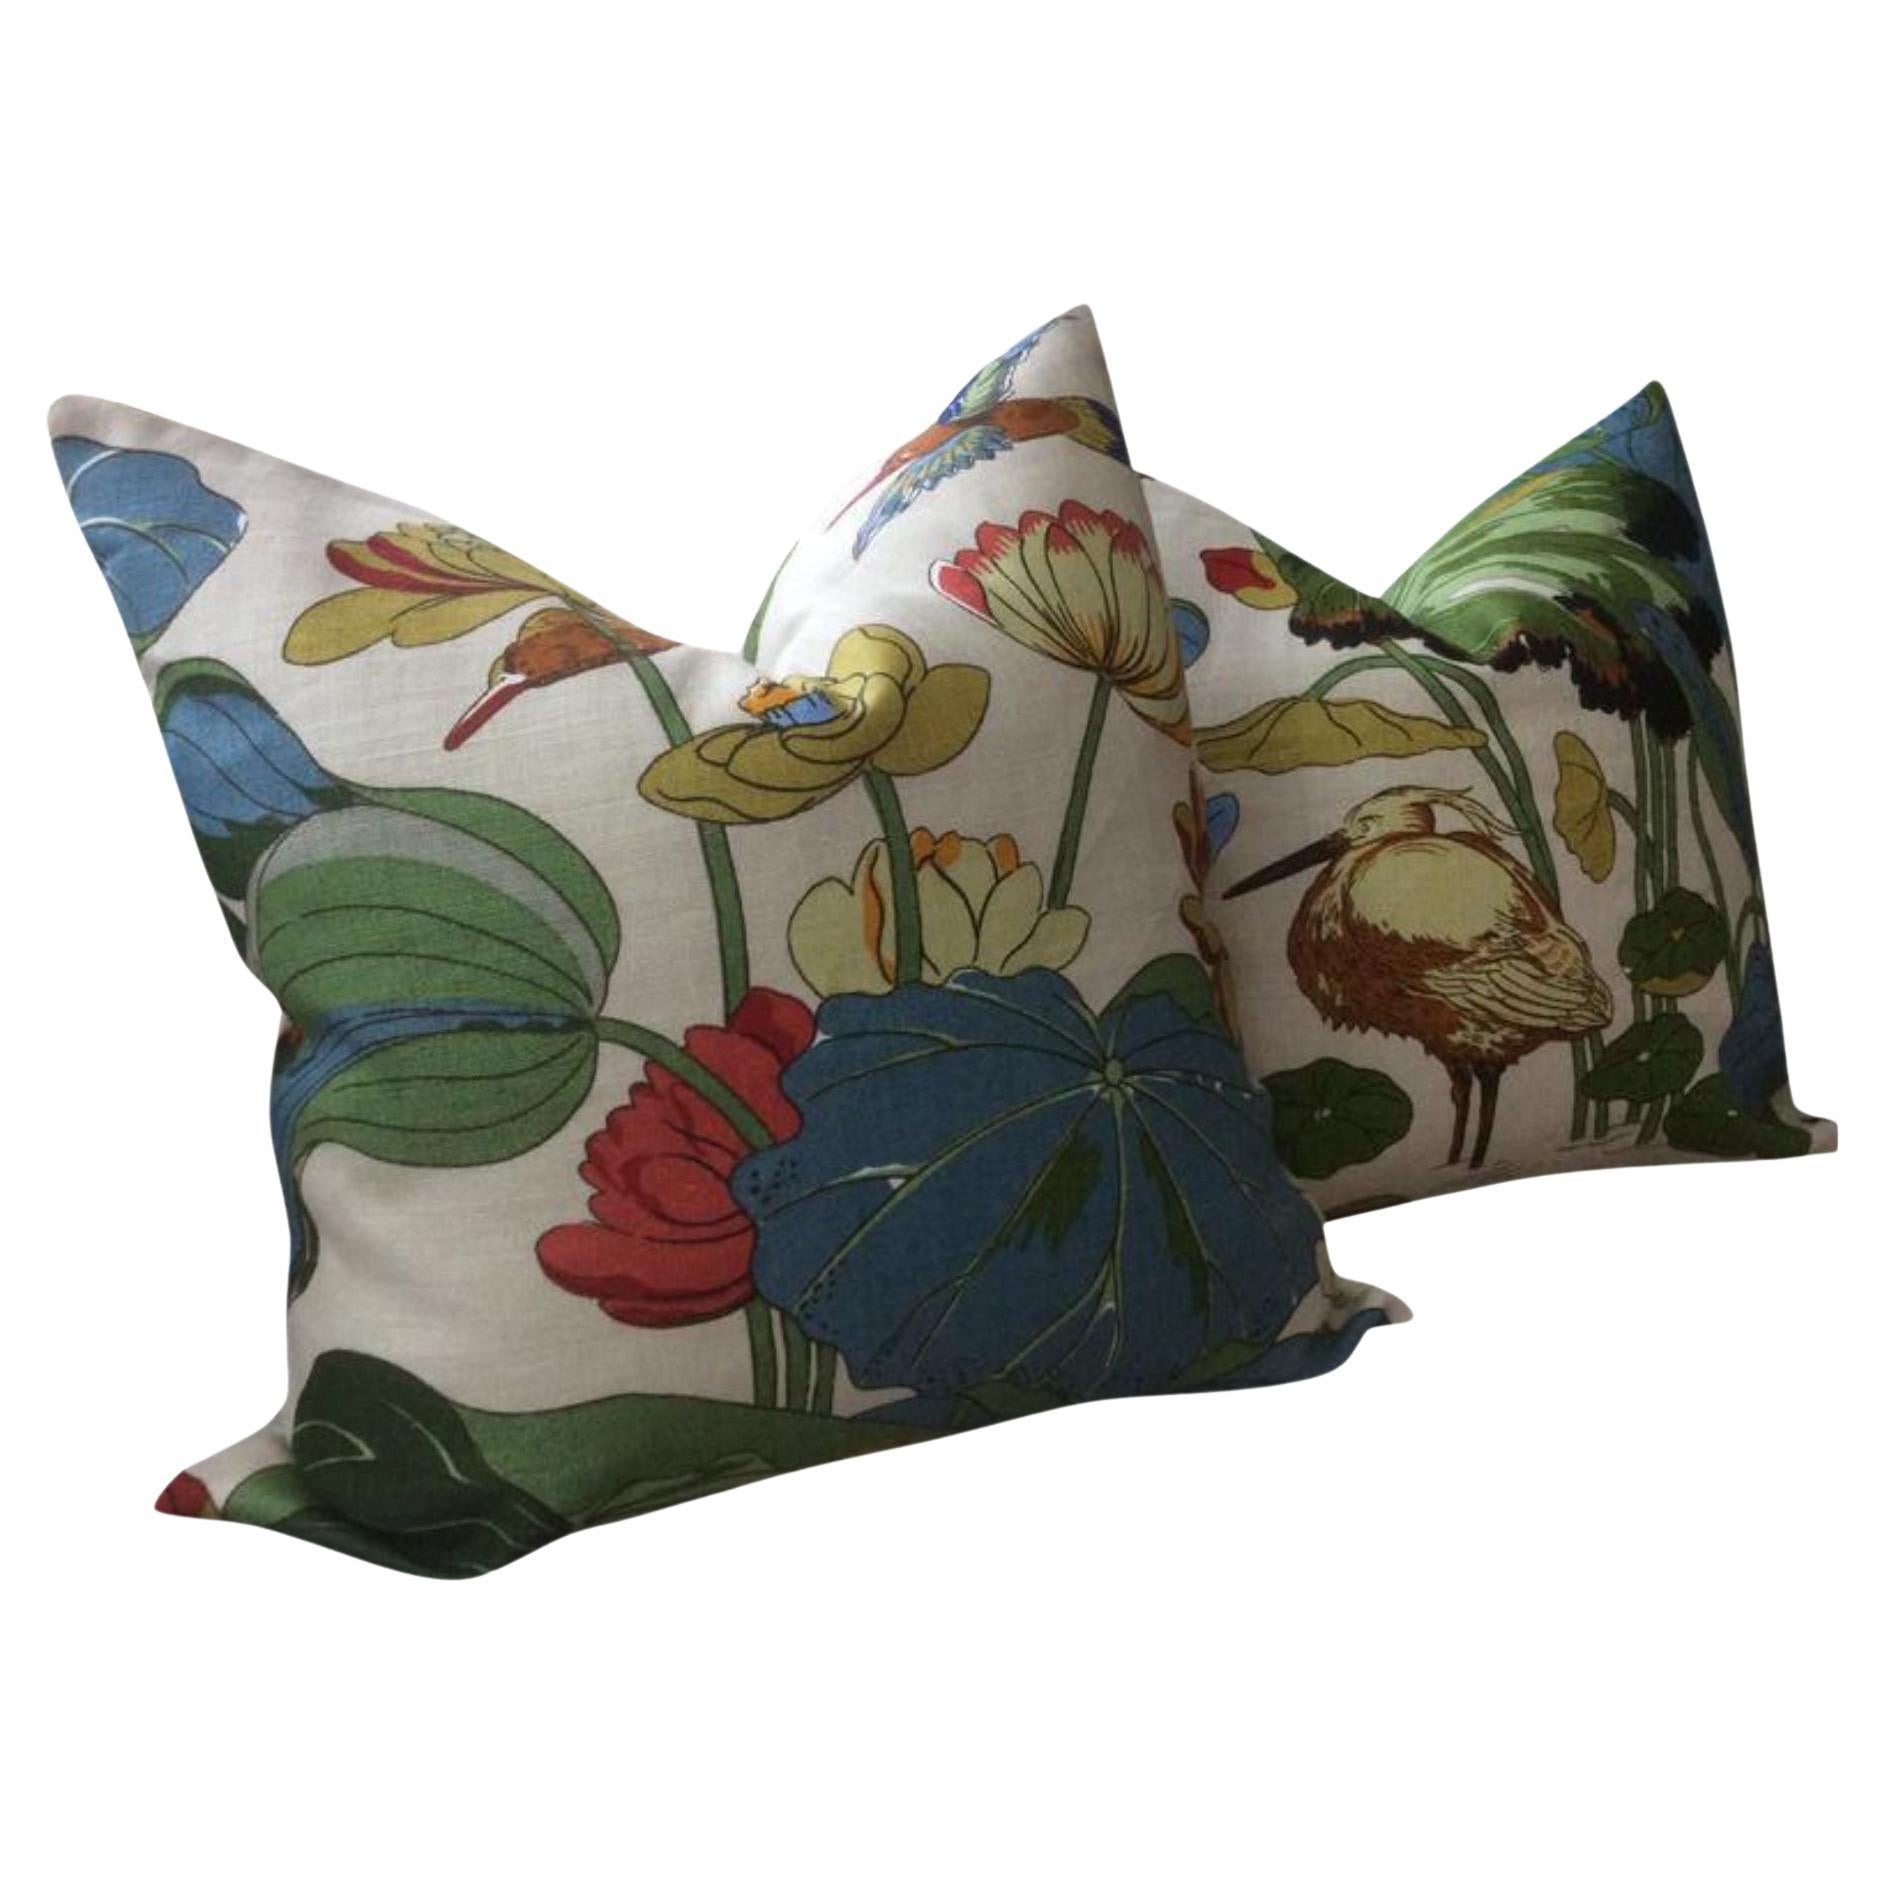 Contemporary g.p. And J Baker “Nympheus” Pillows in Stone - a Pair For Sale